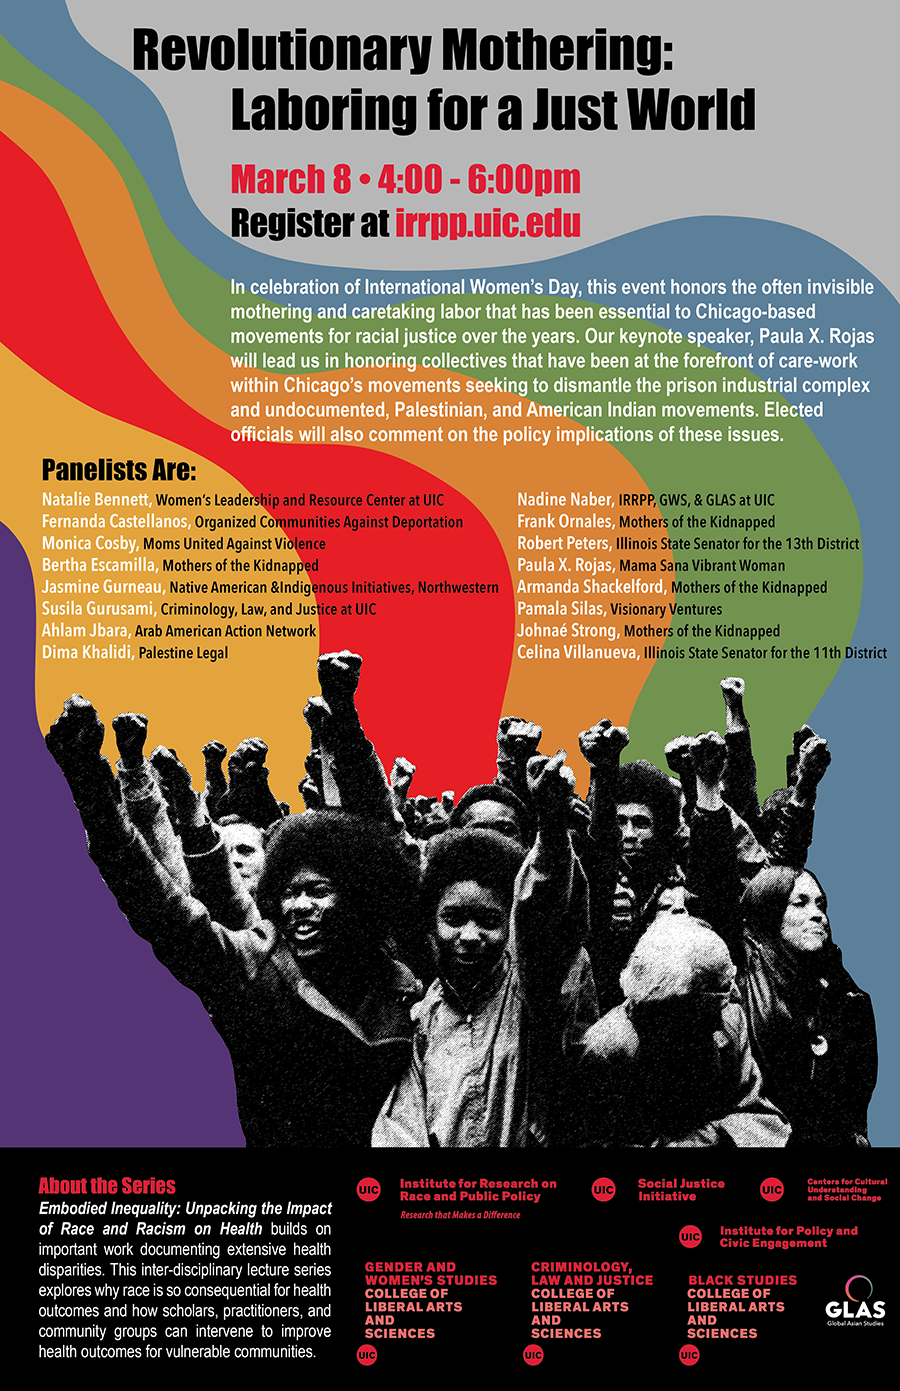 A colorful background with rainbow colors behind a black and white image of a crowd with raised fists and text about the Revolutionary Mothering event above it